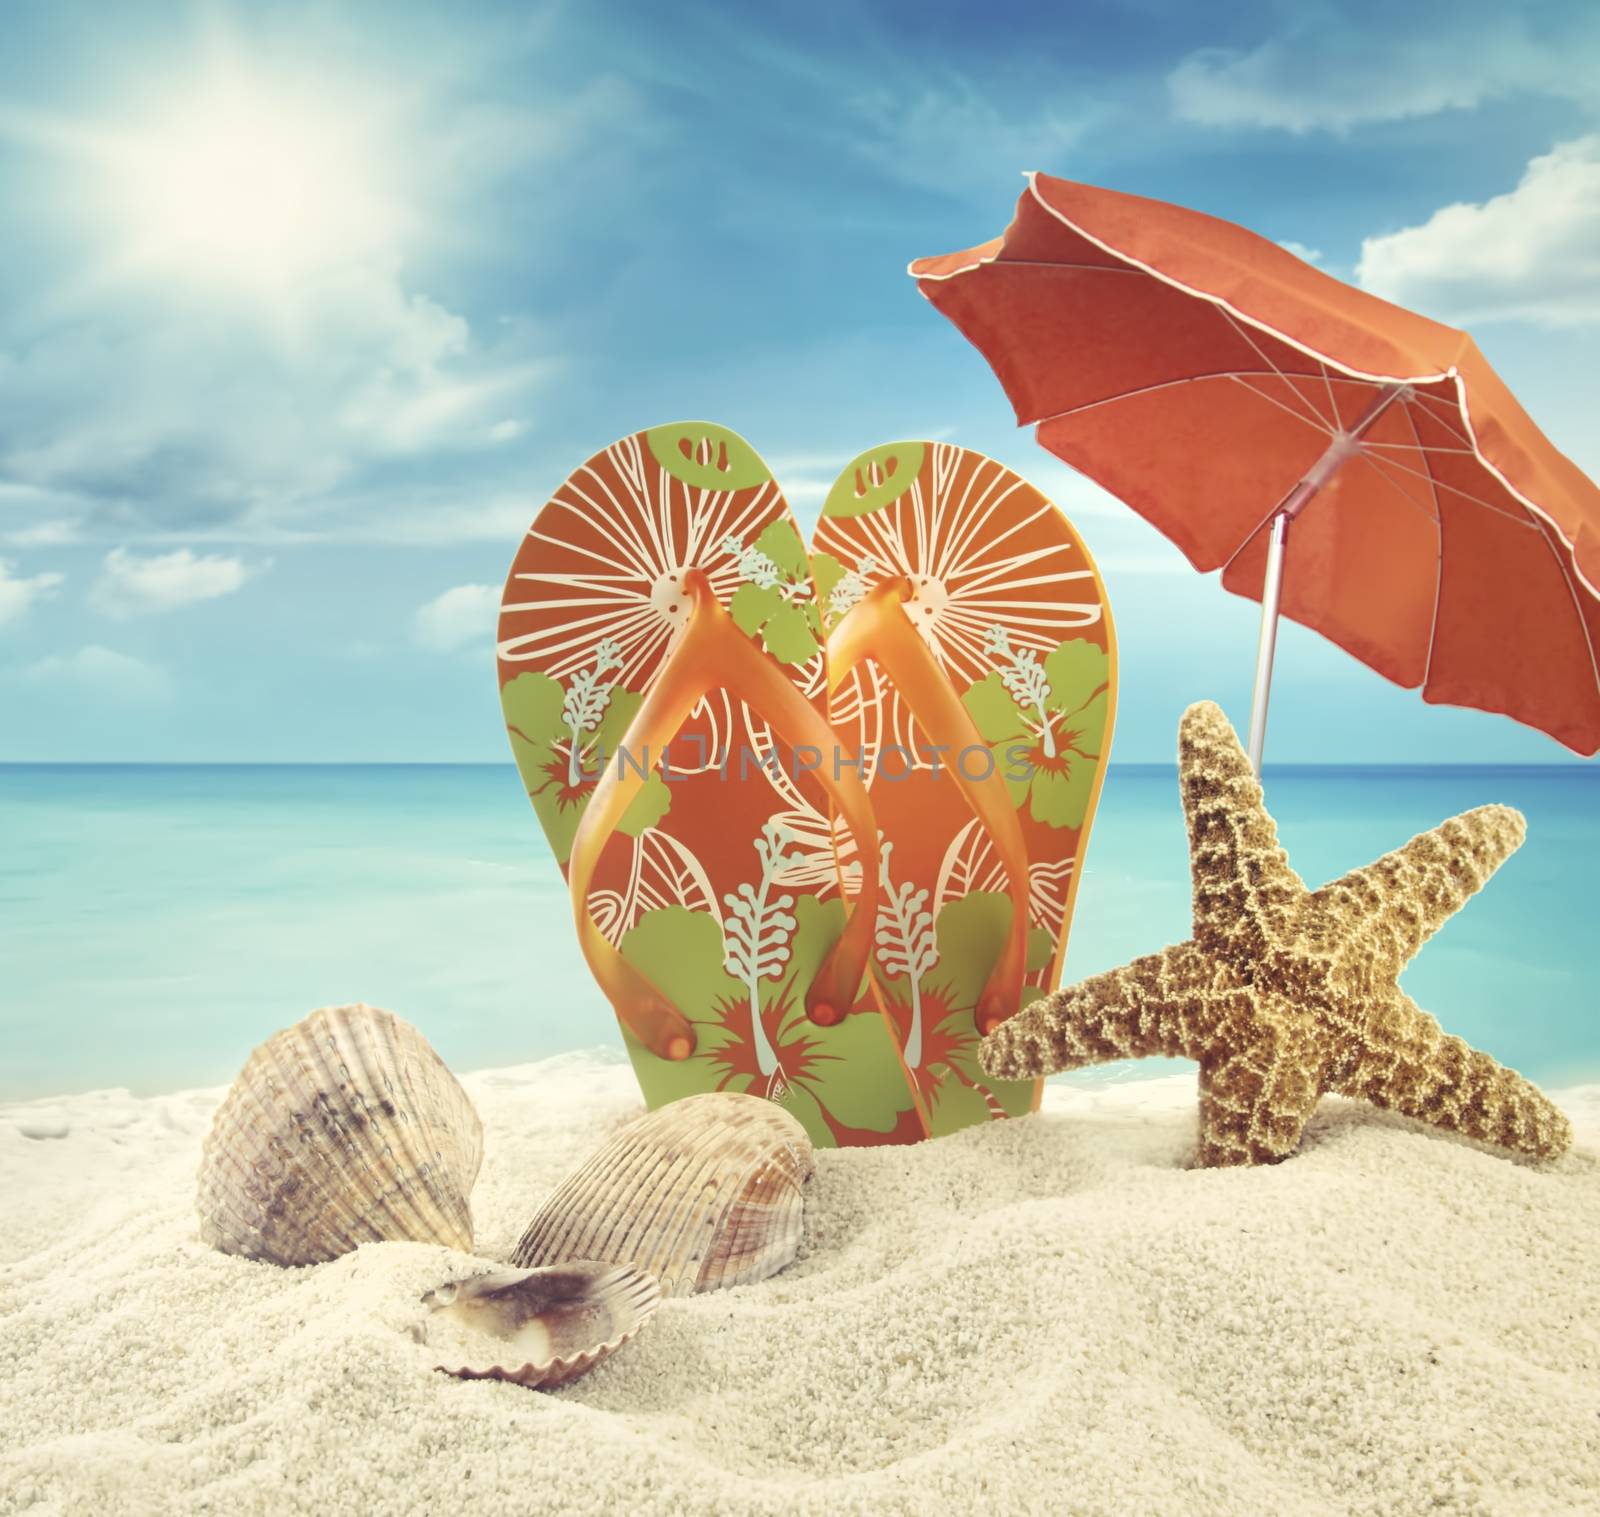 Sandals and starfish with beach umbrella at the ocean by Sandralise